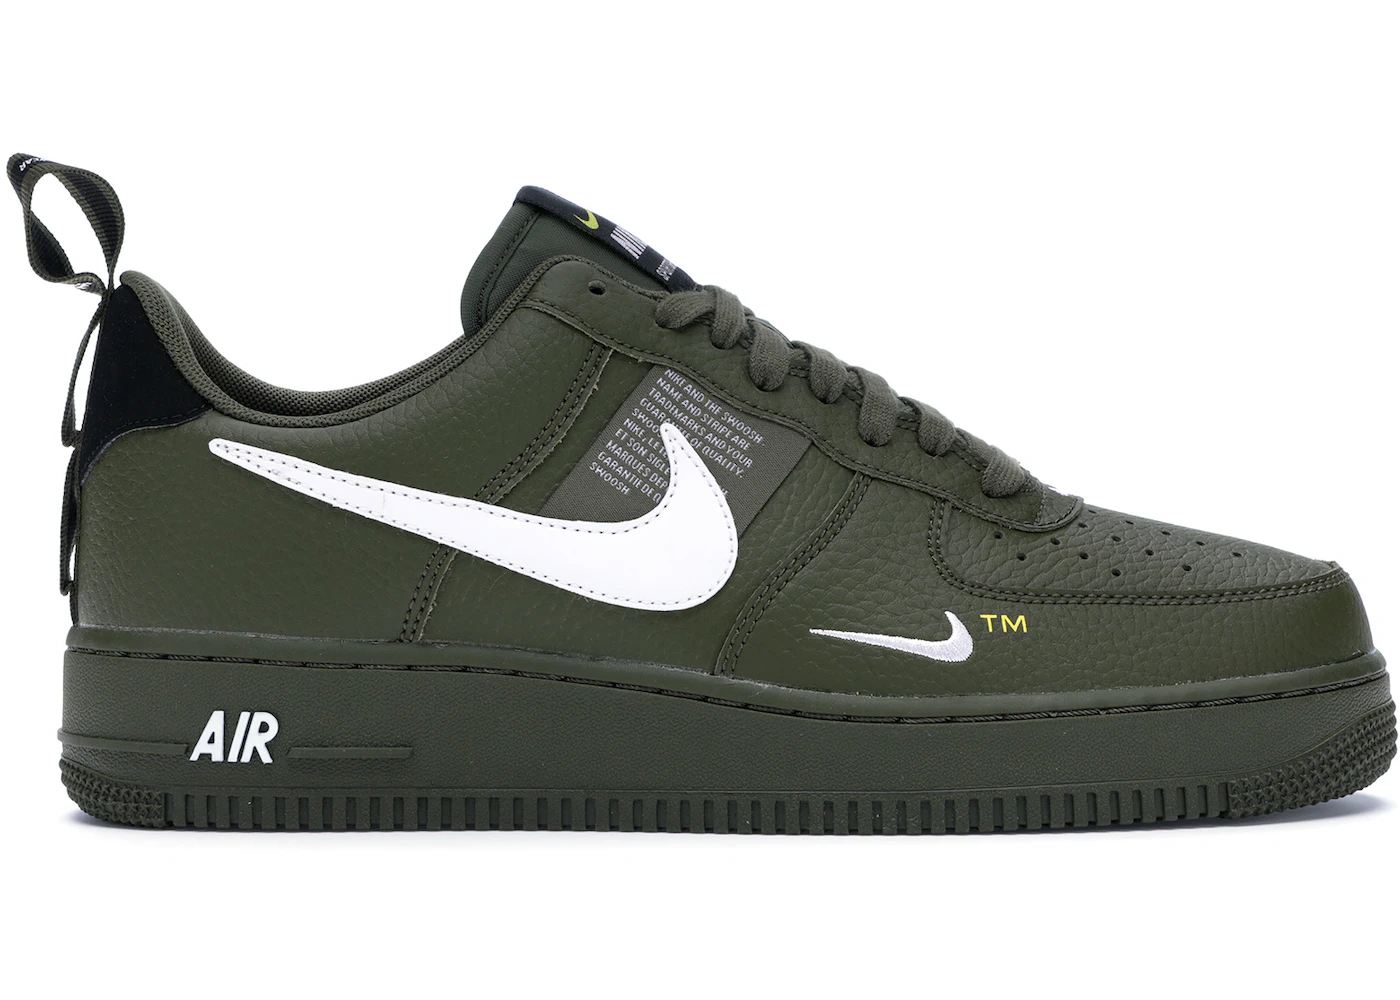 Size+8+-+Nike+Air+Force+1+Low+Olive+Green+-+DA8481-300 for sale